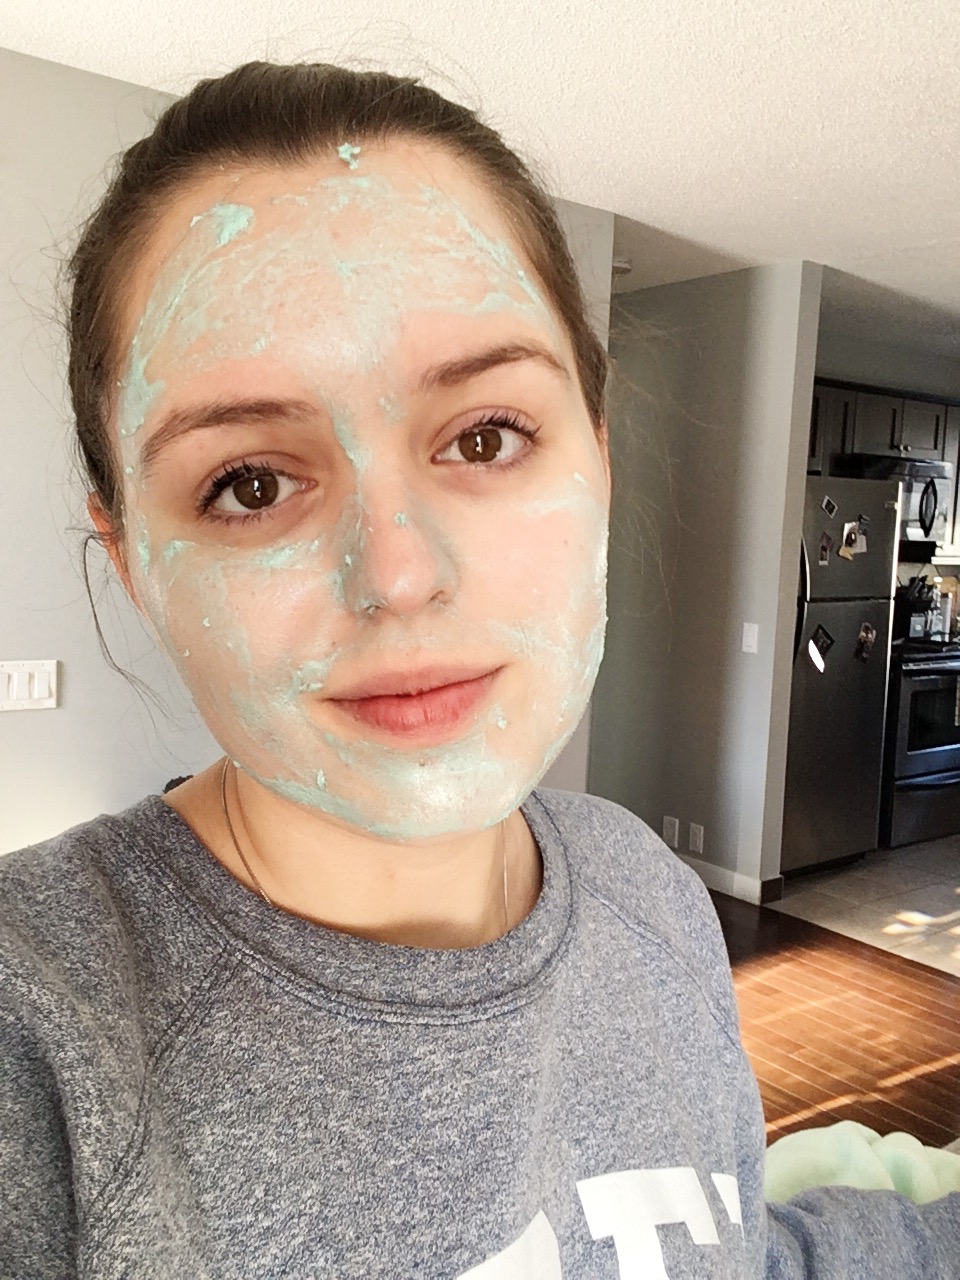 Birth of Venus Lush Face Mask Review